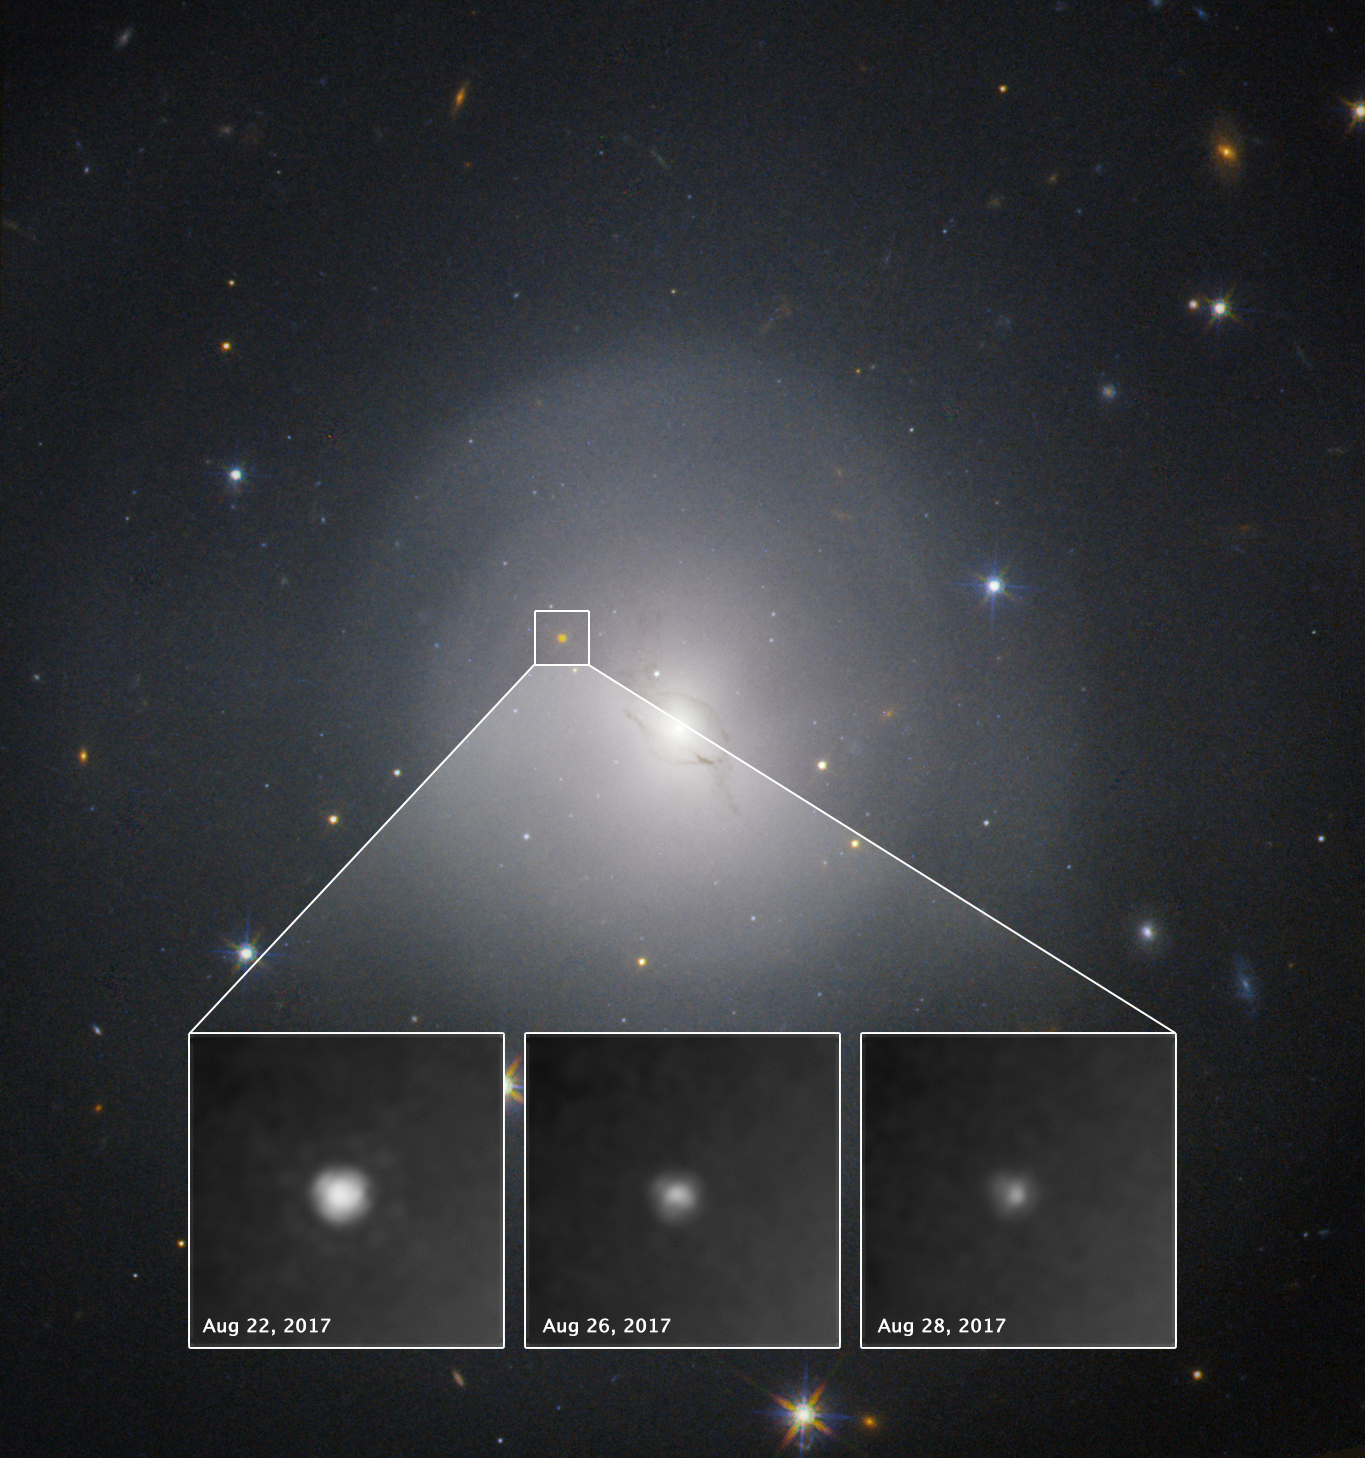 Hubble observations of neutron star collision in NGC 4993